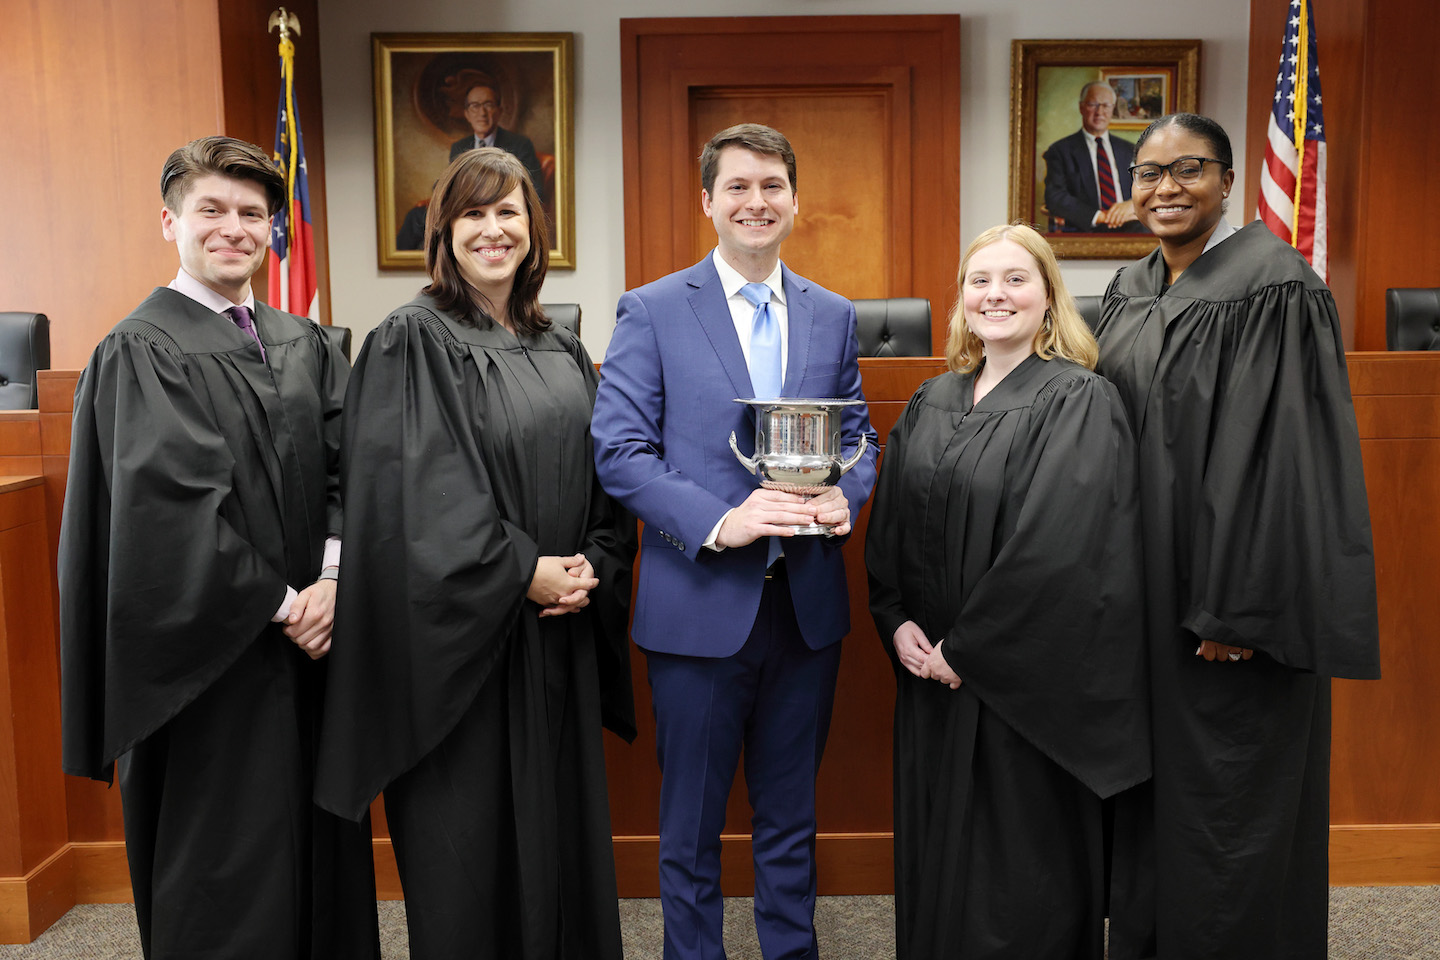 Group of people with judge's robes and a student holding a trophy